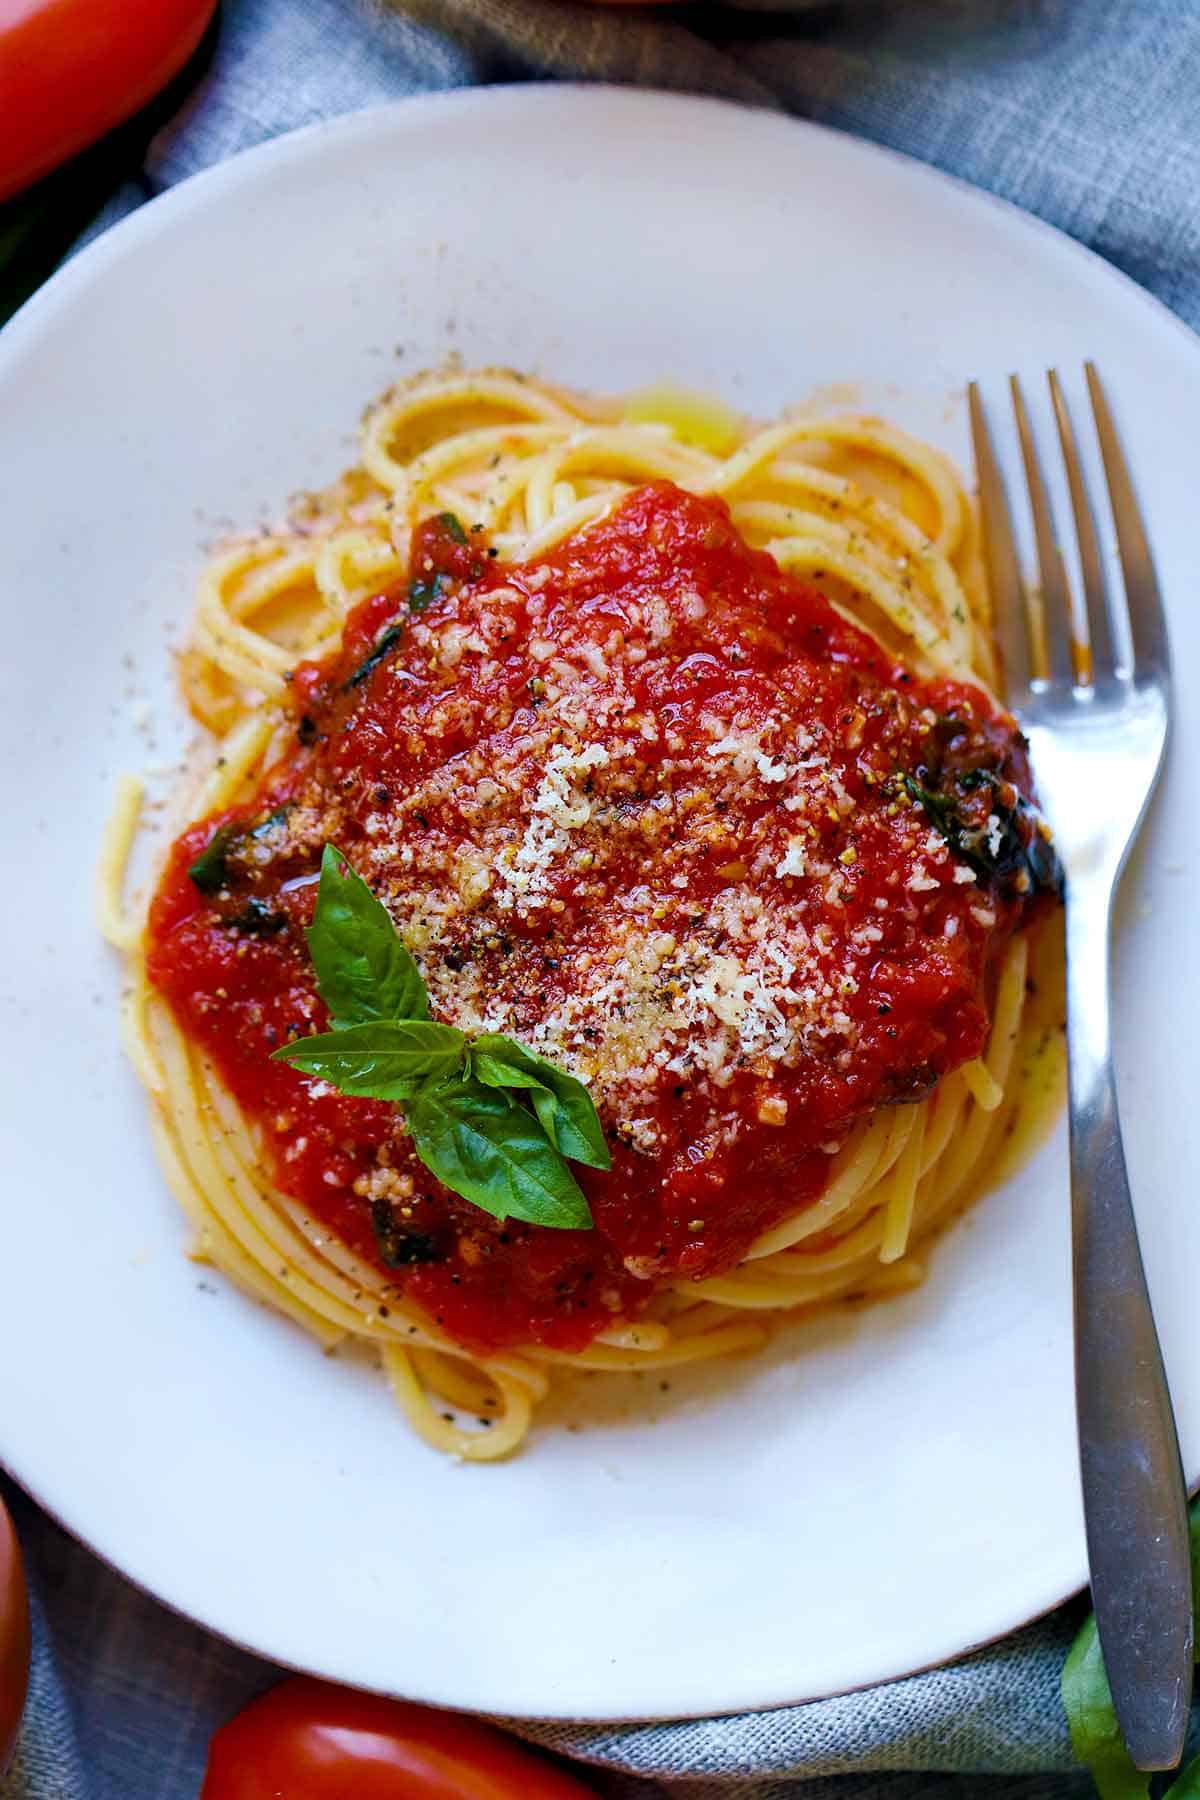 Overhead photo of a plate with spaghetti and tomato sauce topped with a basil leaf and parmesan cheese and a fork next to it.